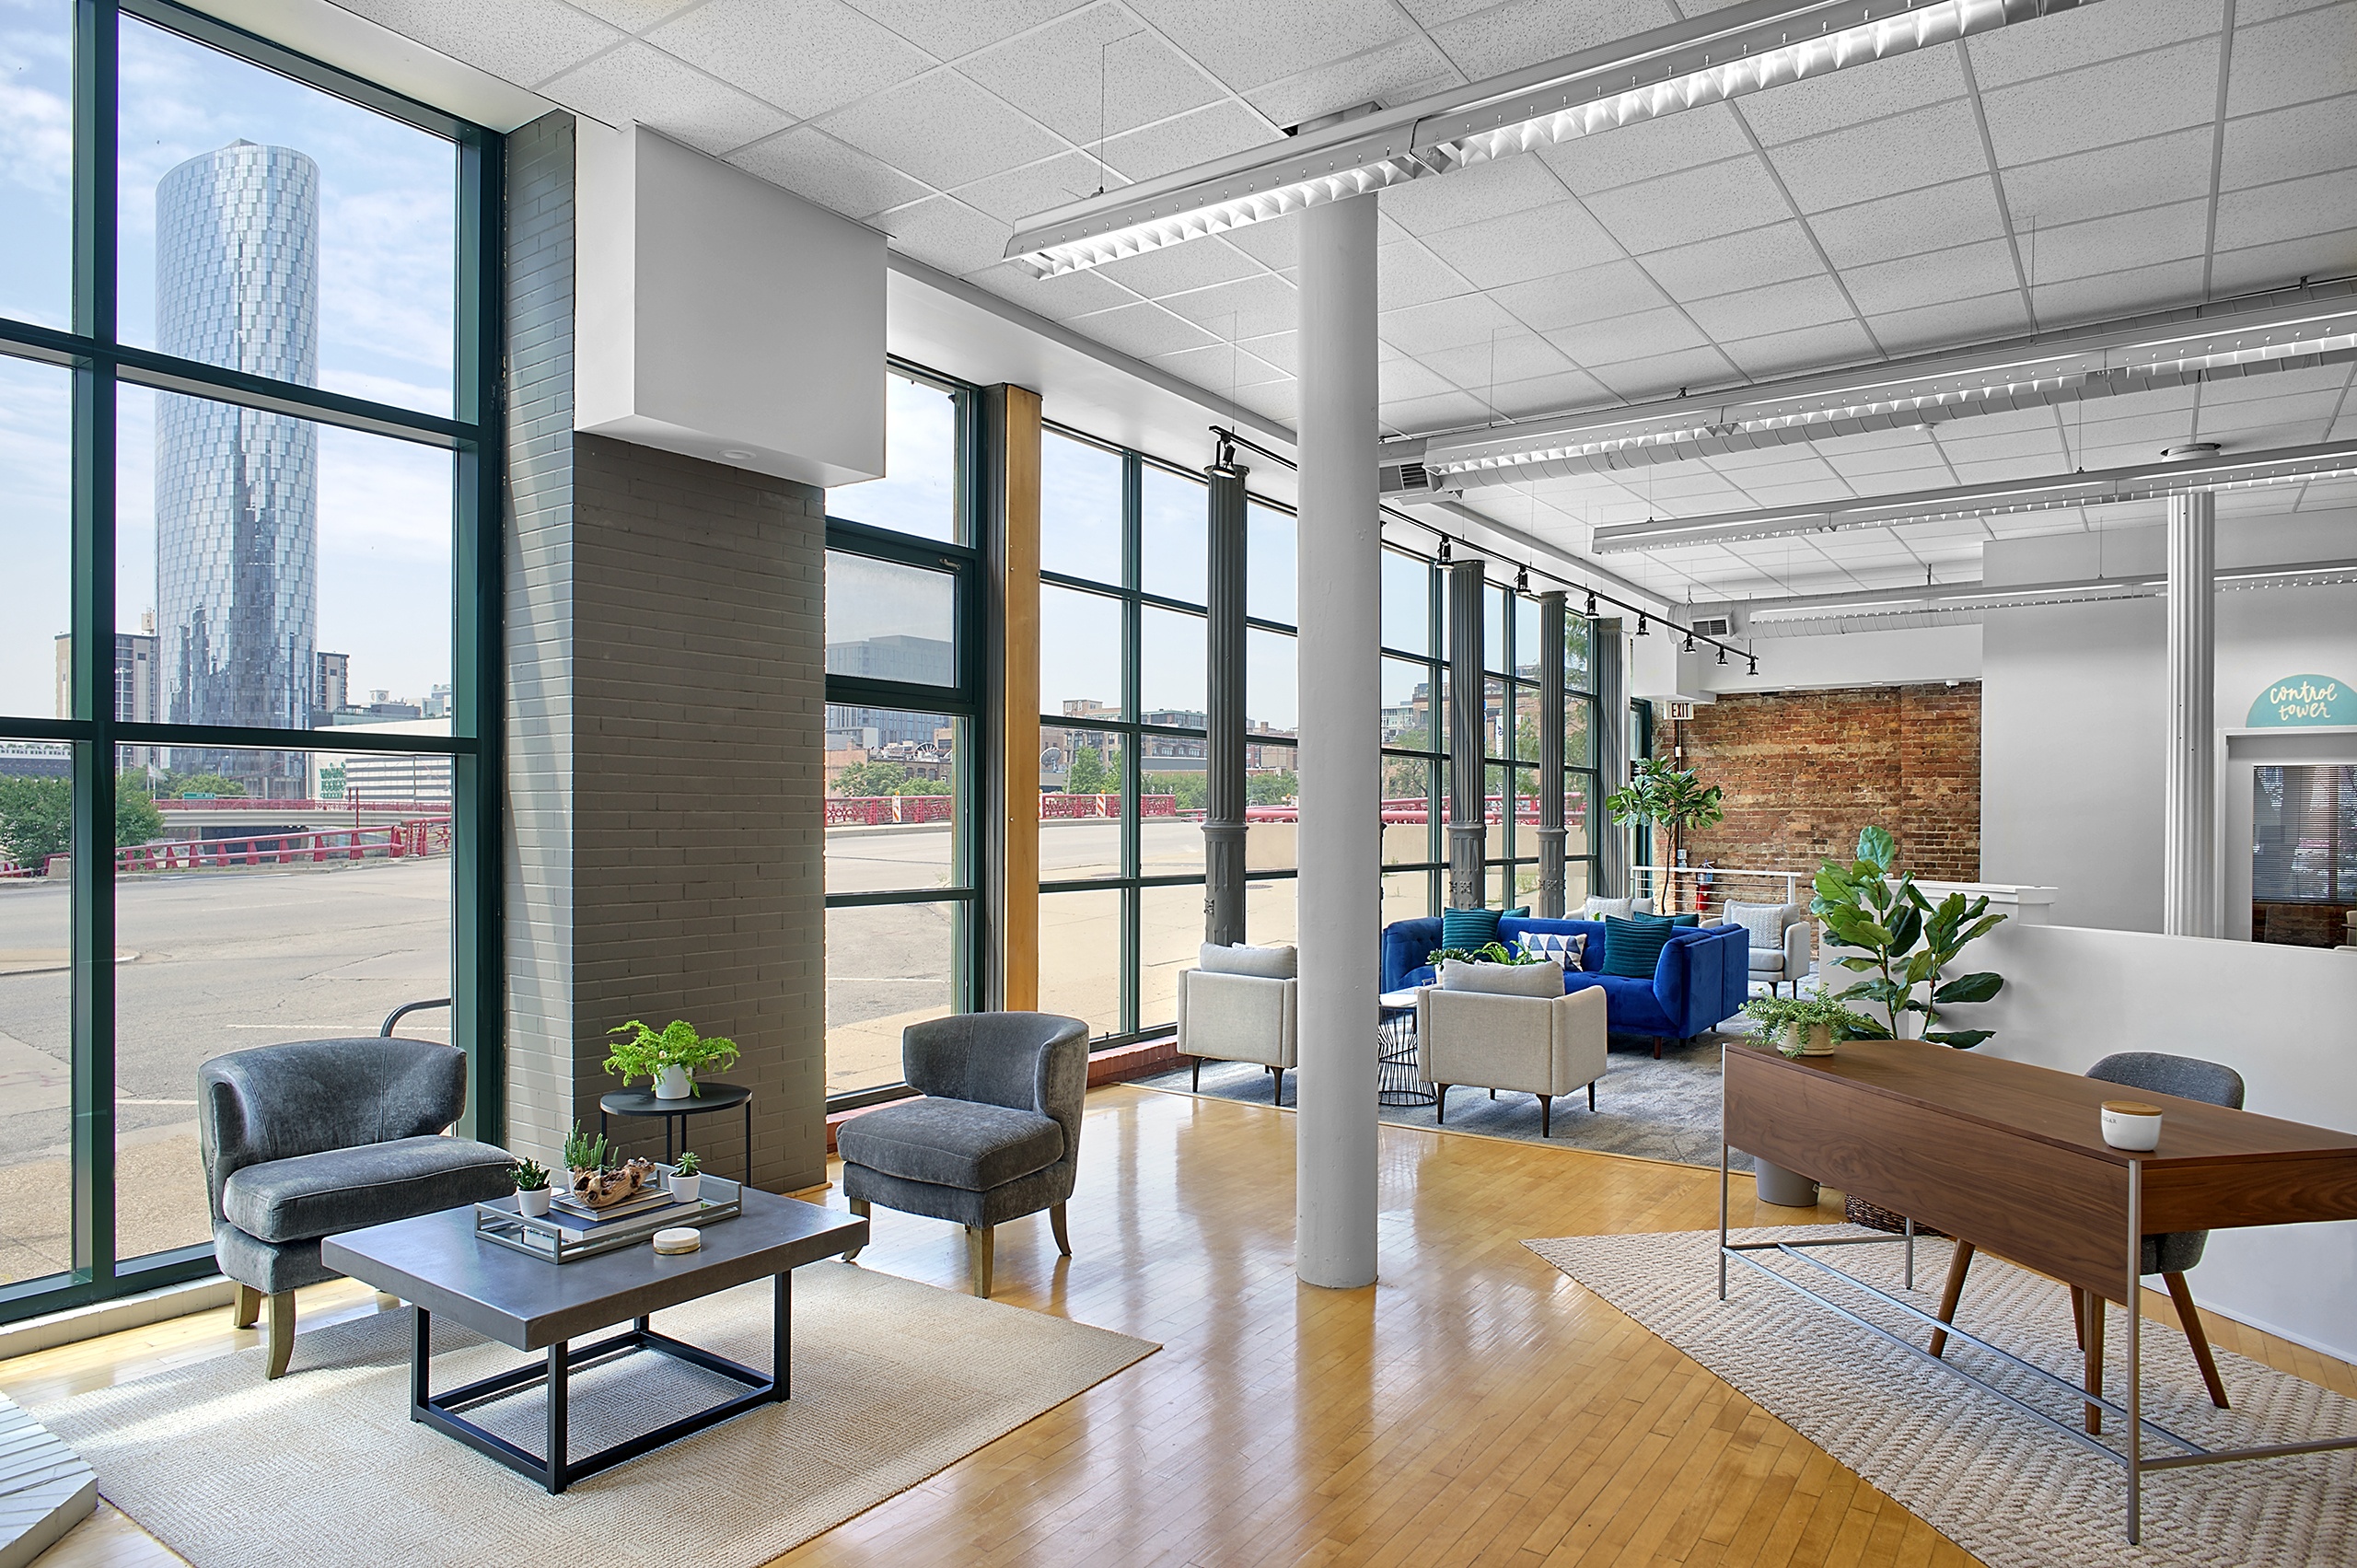 Open Concept Offices: Are They Right for You?